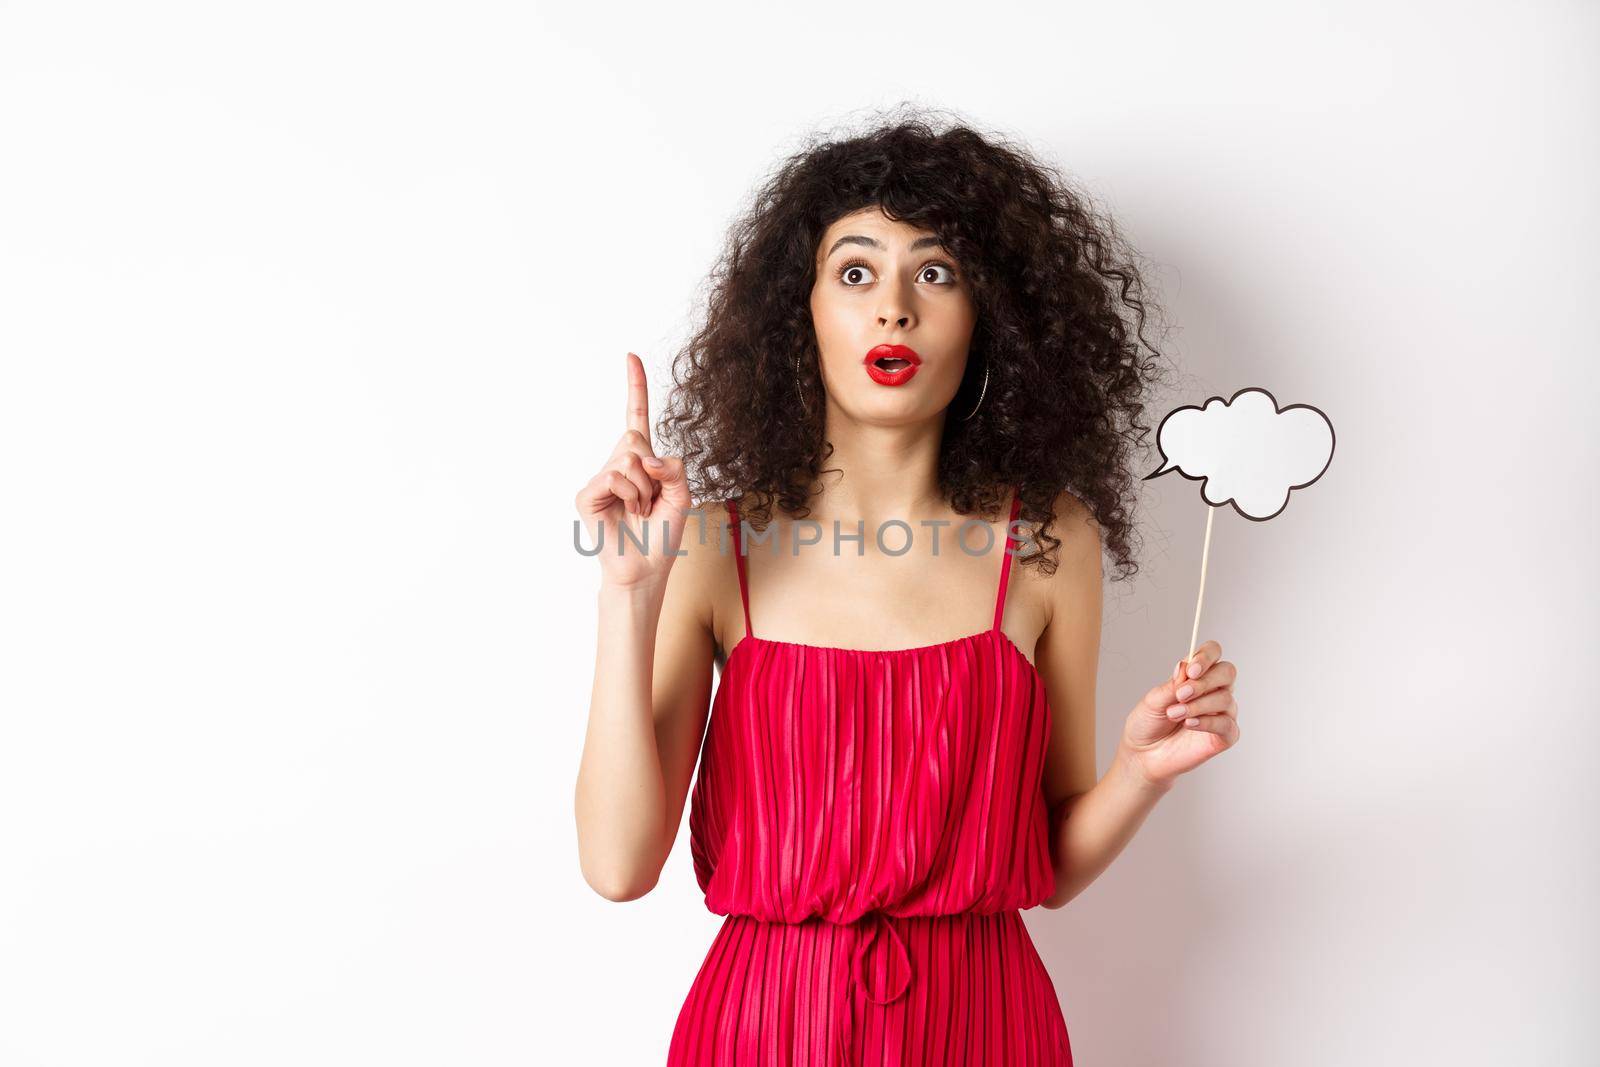 Excited fashionable woman in red dress pitching an idea, raising finger in eureka sign, holding thought cloud, standing on white background.